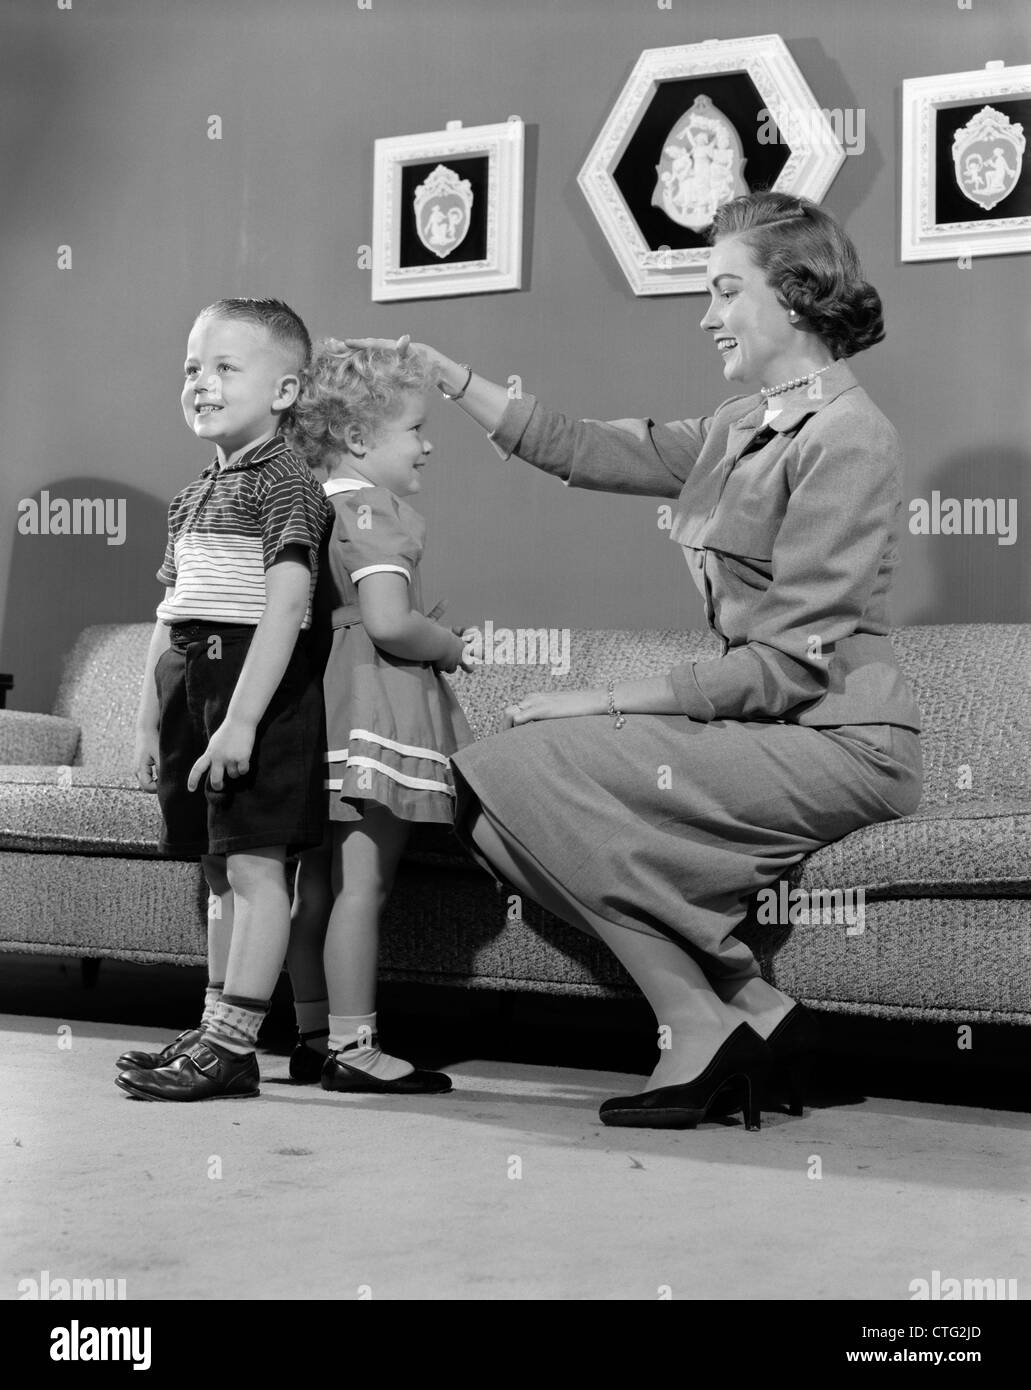 1950s MOTHER MEASURING DIFFERENCE IN HEIGHT BETWEEN SON AND DAUGHTER INDOOR Stock Photo